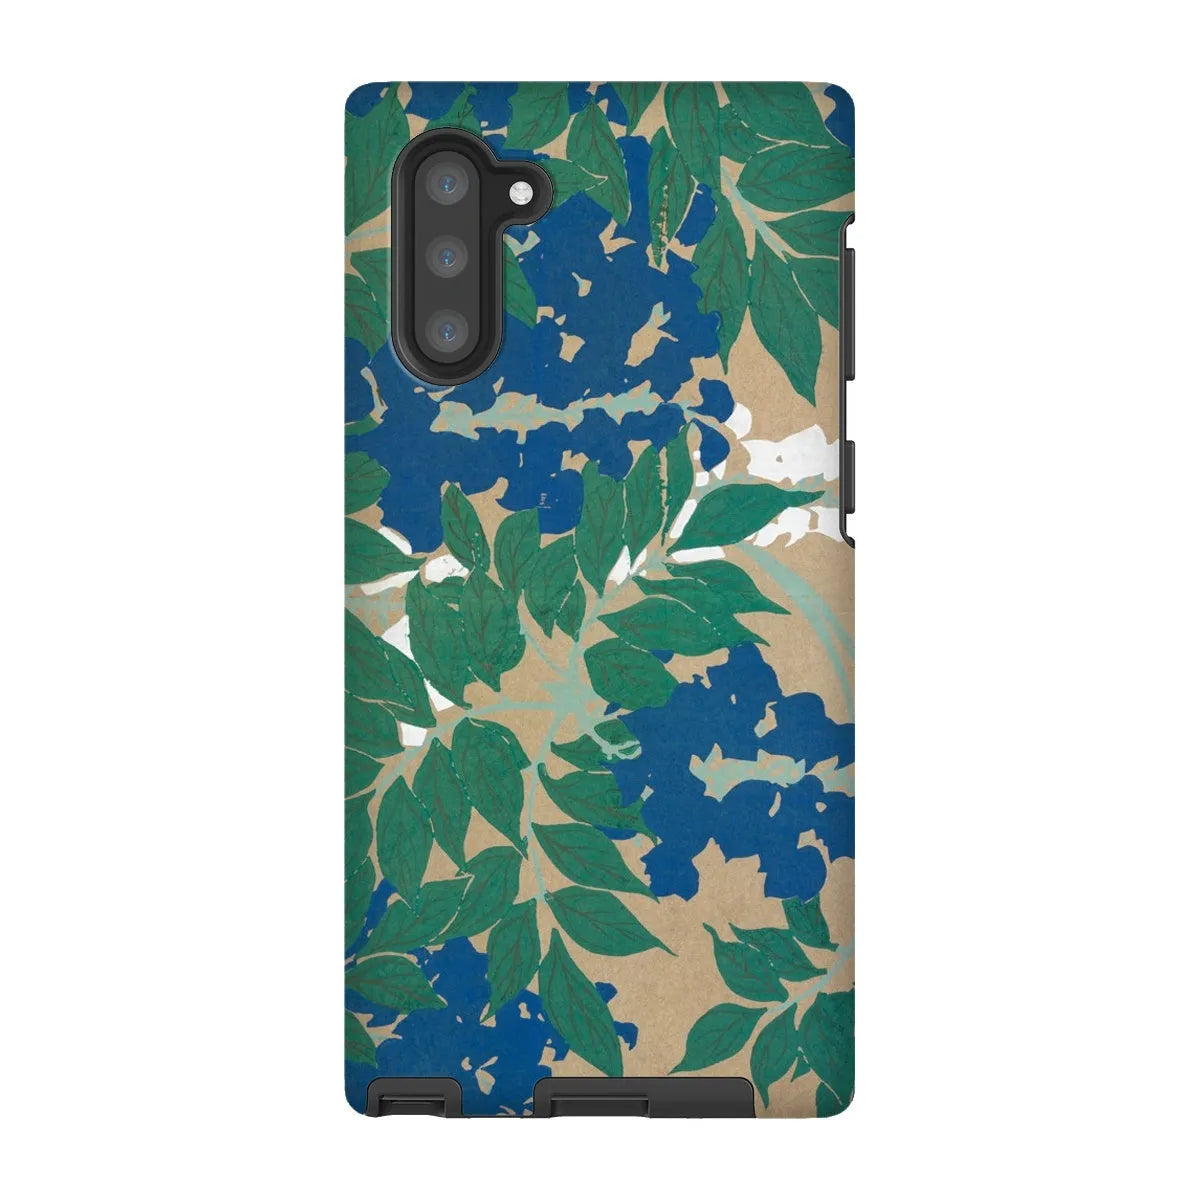 Wisteria From Momoyogusa - Floral Phone Case - Kamisaka Sekka - Samsung Galaxy Note 10 / Matte - Mobile Phone Cases